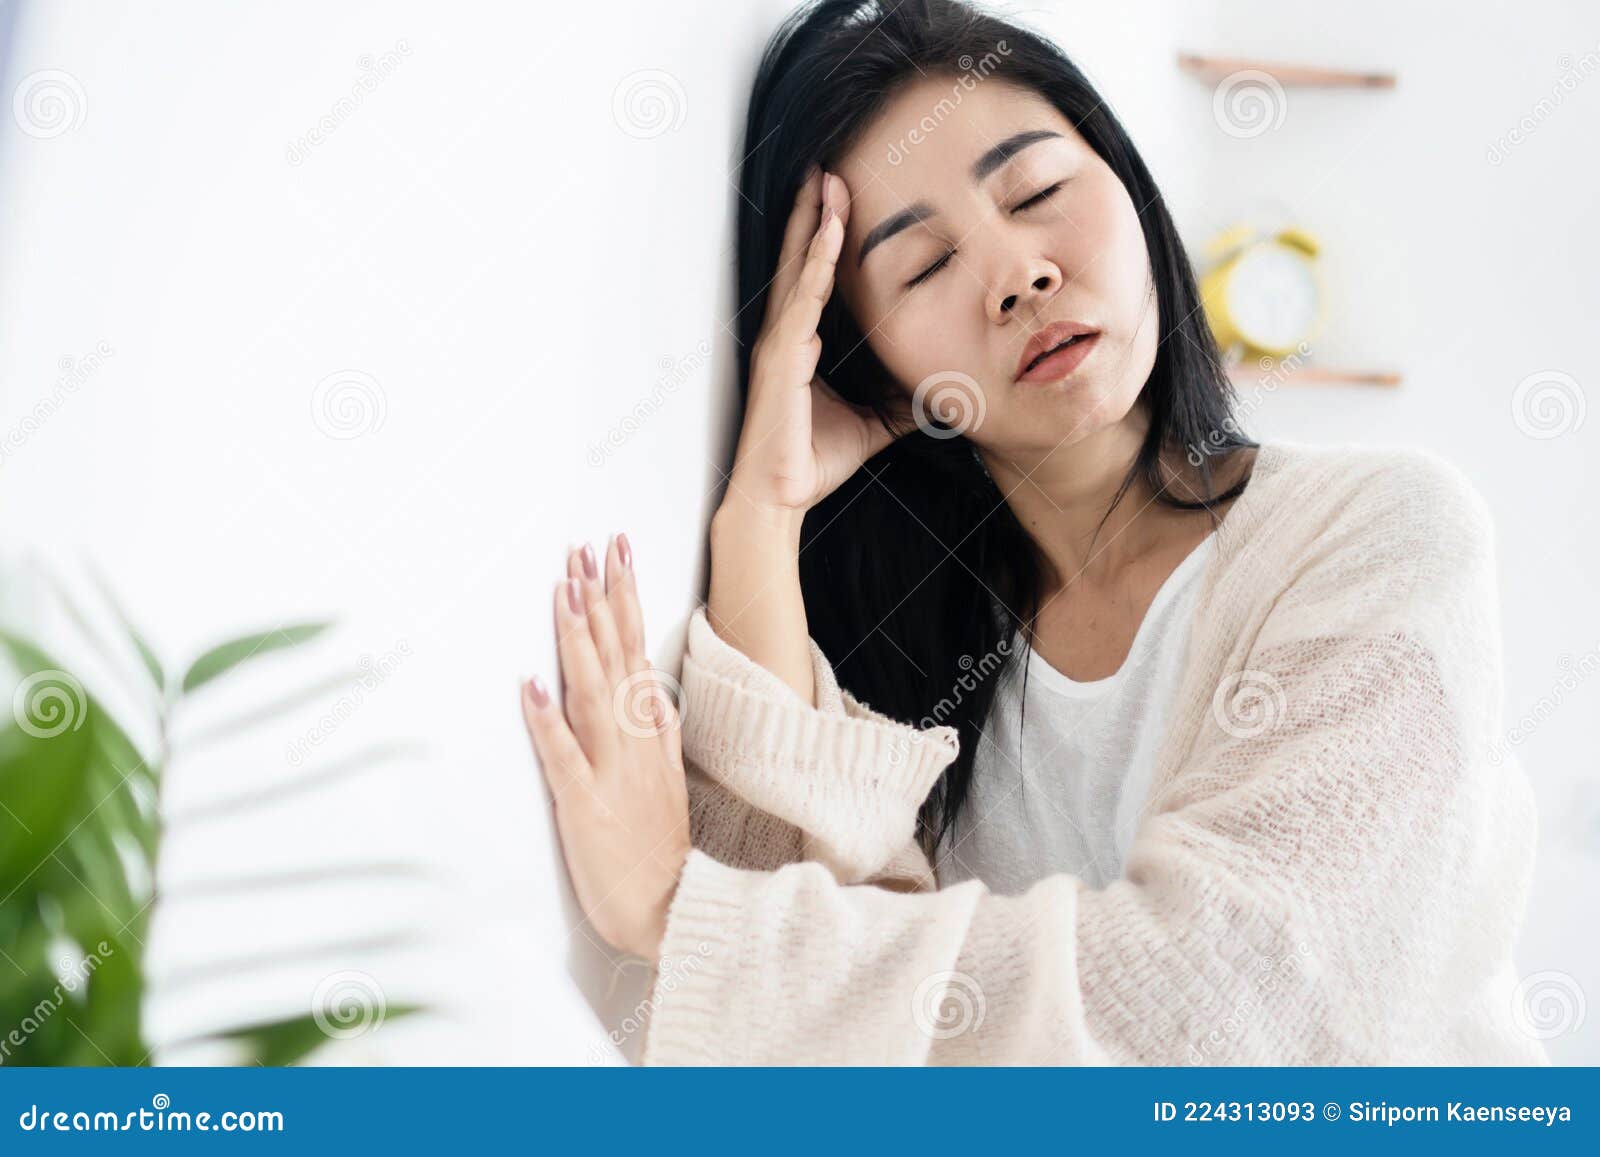 asian woman having problem with meniere`s disease, fainting or dizziness hand holding her head leaning against the wall